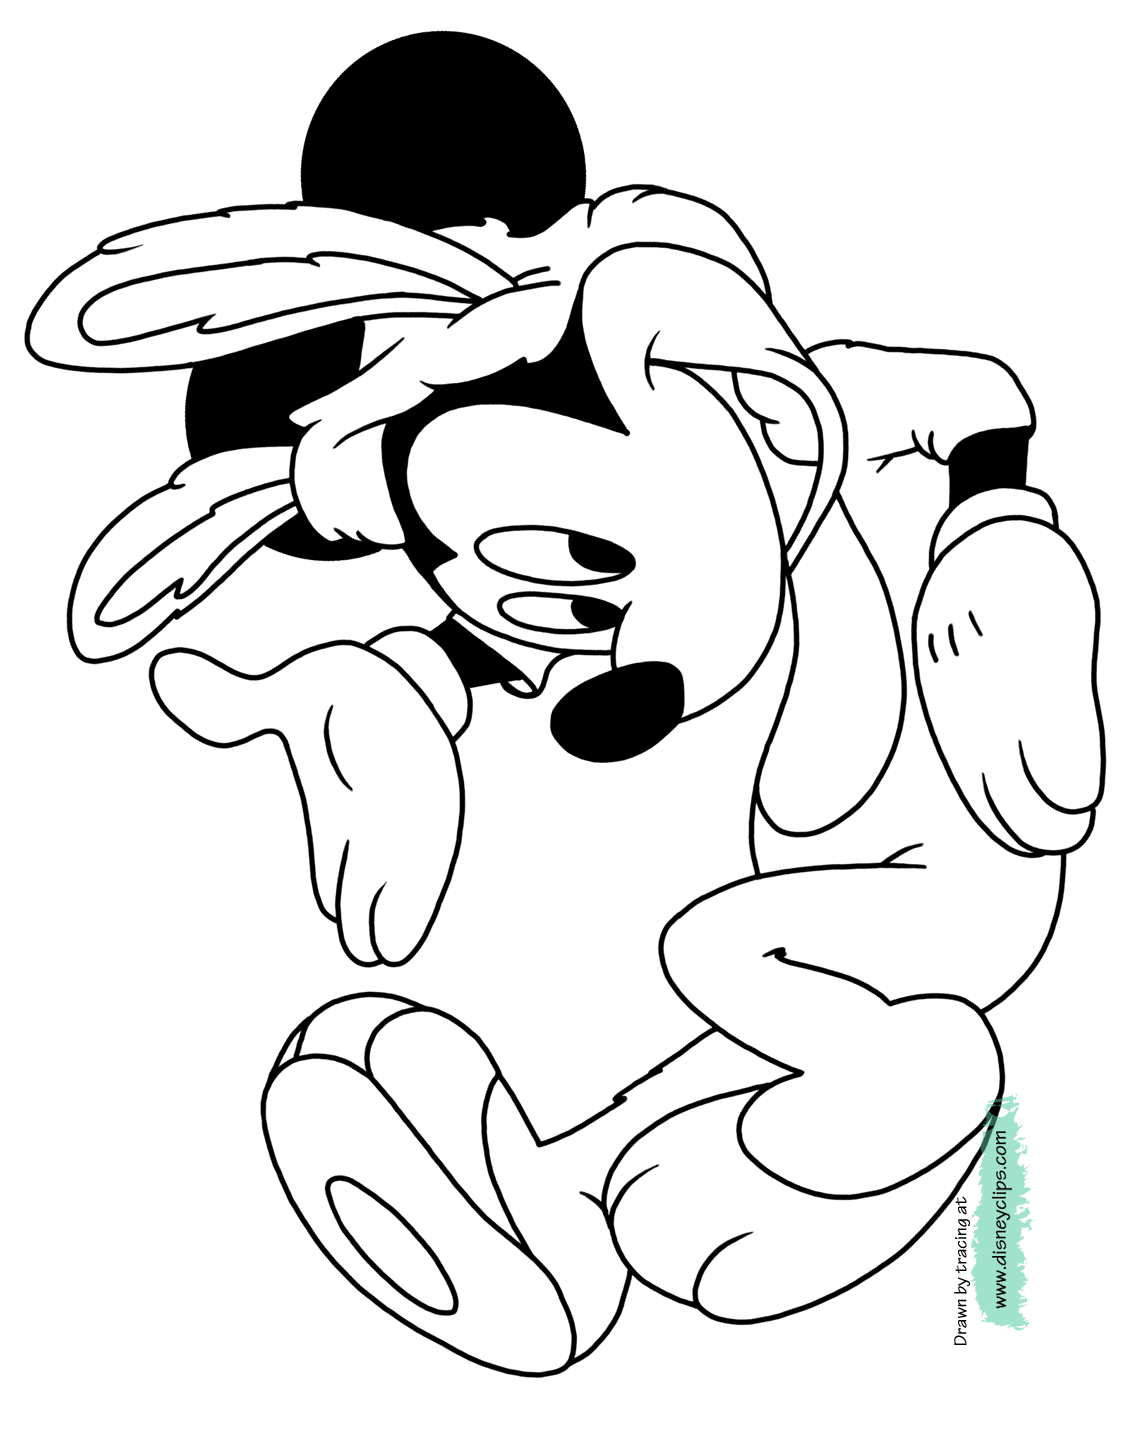 Printable Disney Easter Coloring Pages | Disneyclips.com